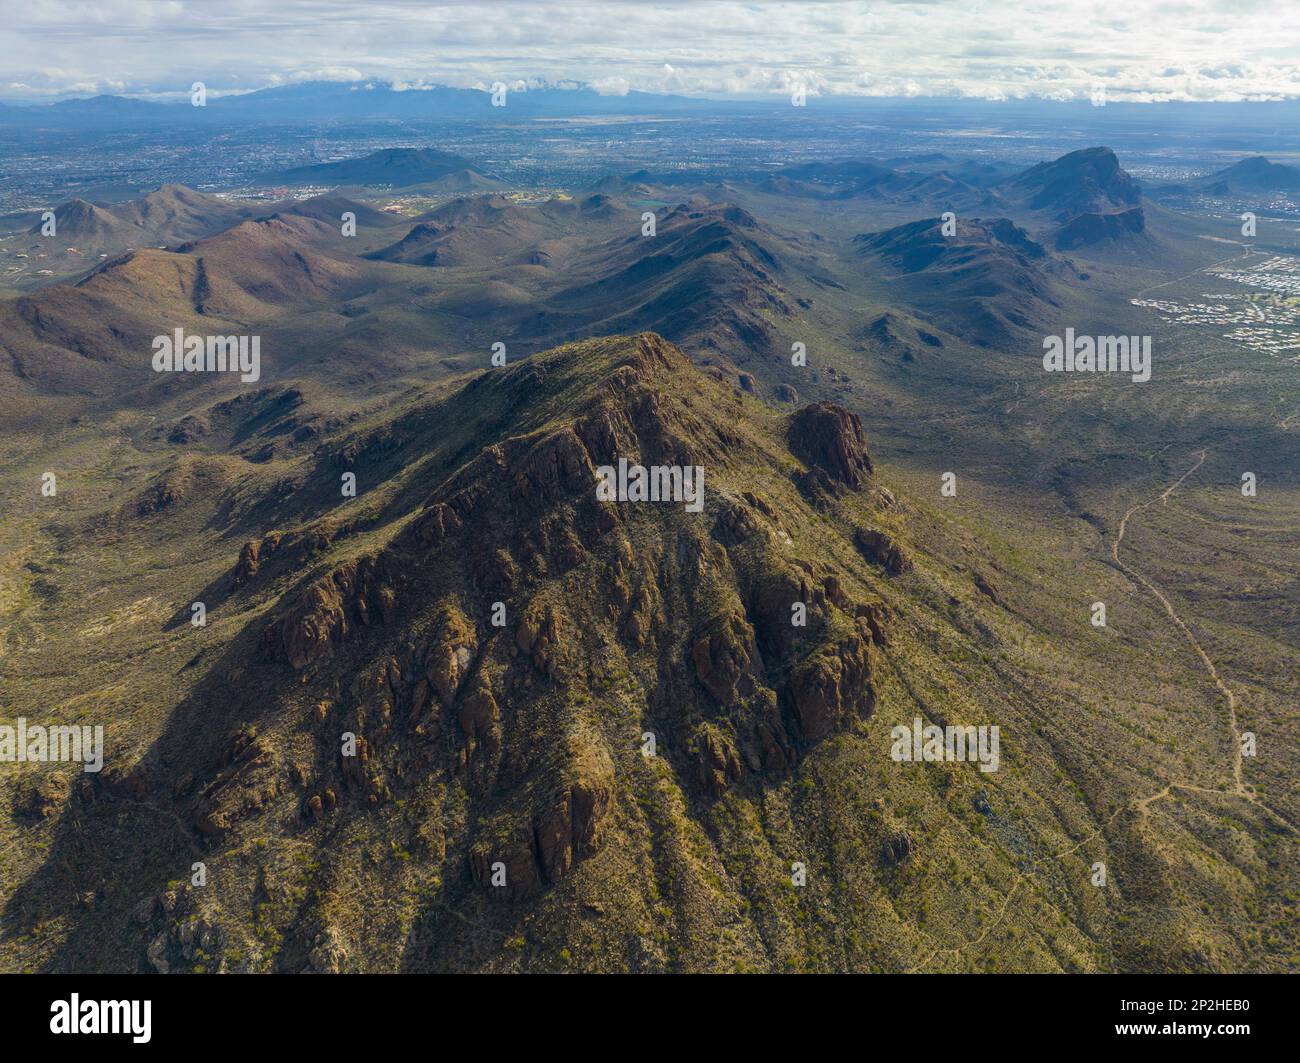 Bren peak and Ringtail Ridge in Tucson Mountains aerial view with Sonoran Desert landscape from Gates Pass near Saguaro National Park in city of Tucso Stock Photo